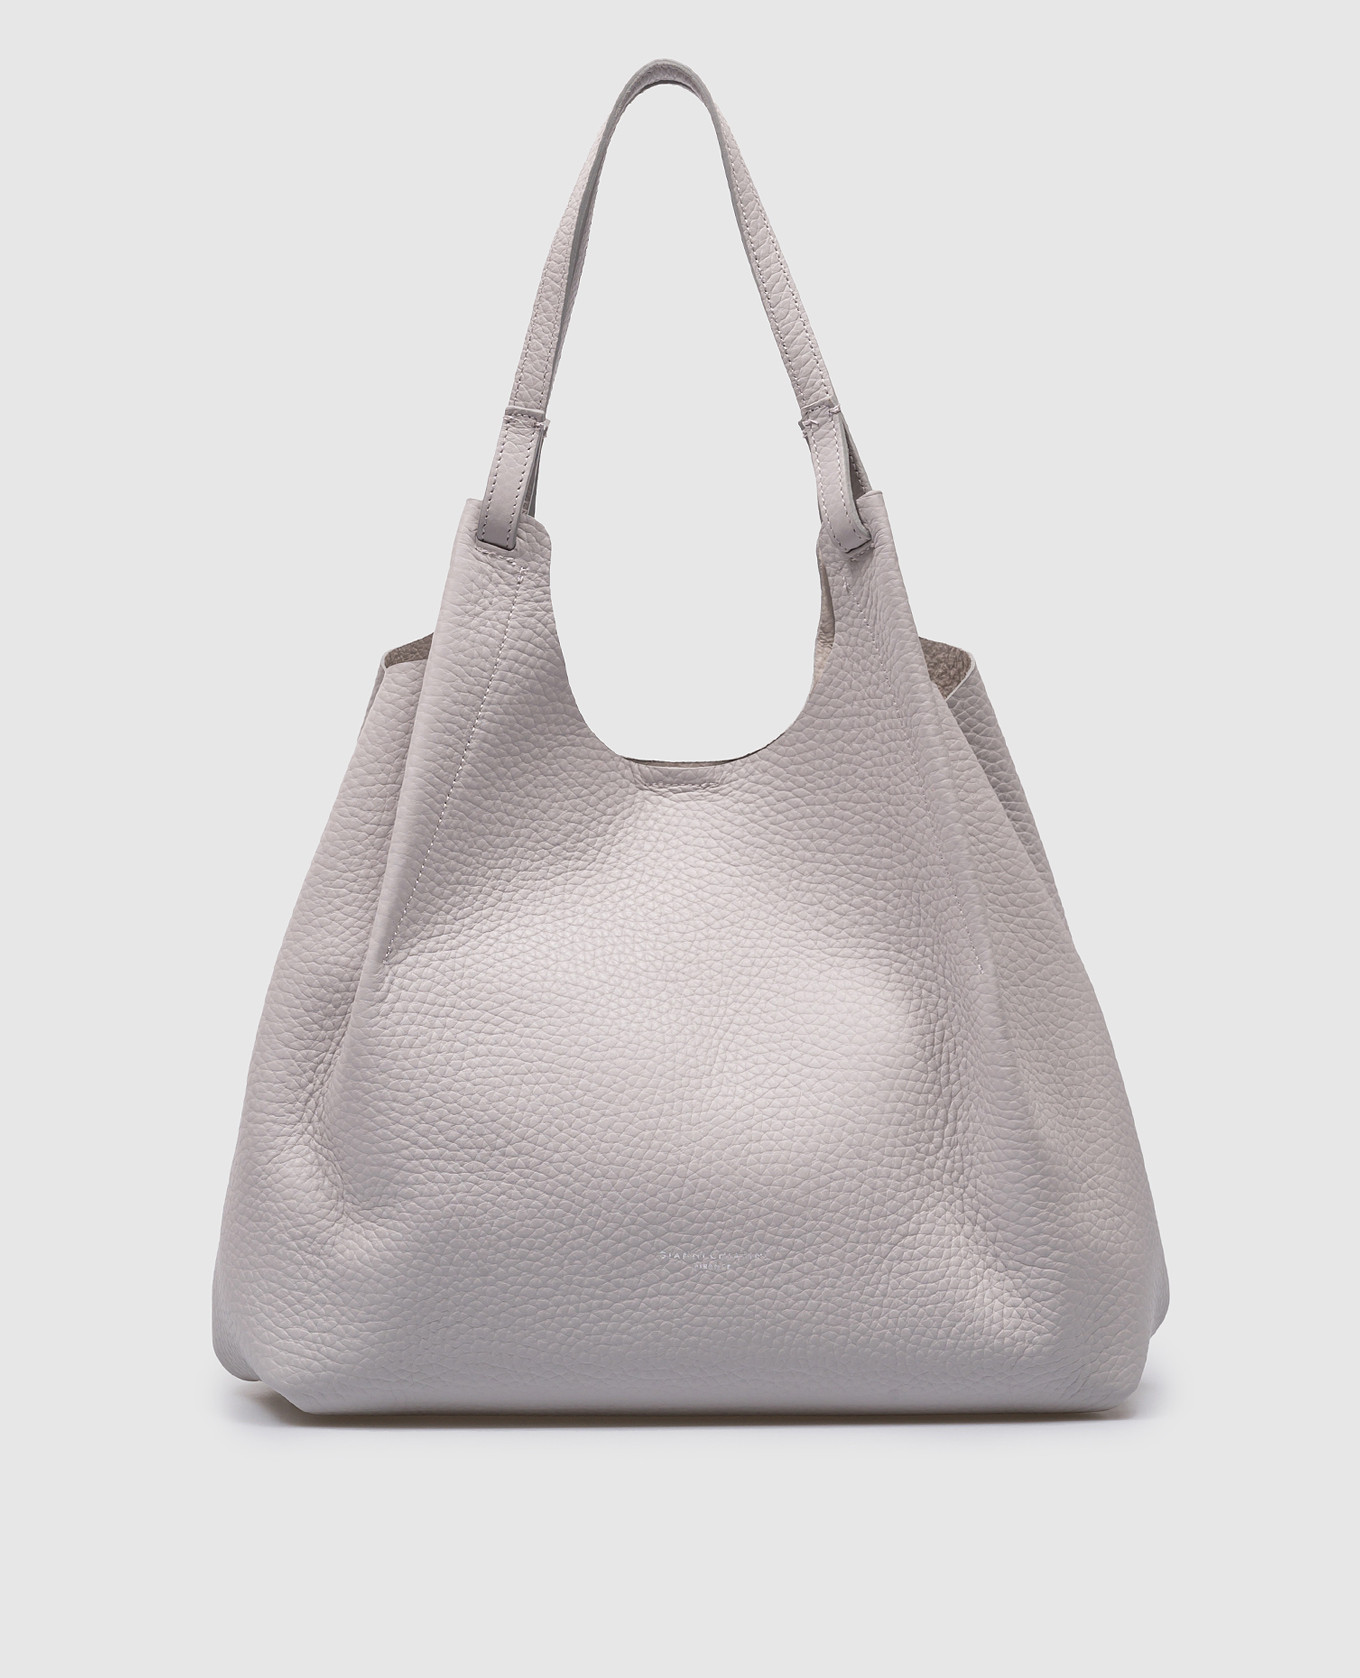 Dua logo tote in gray leather